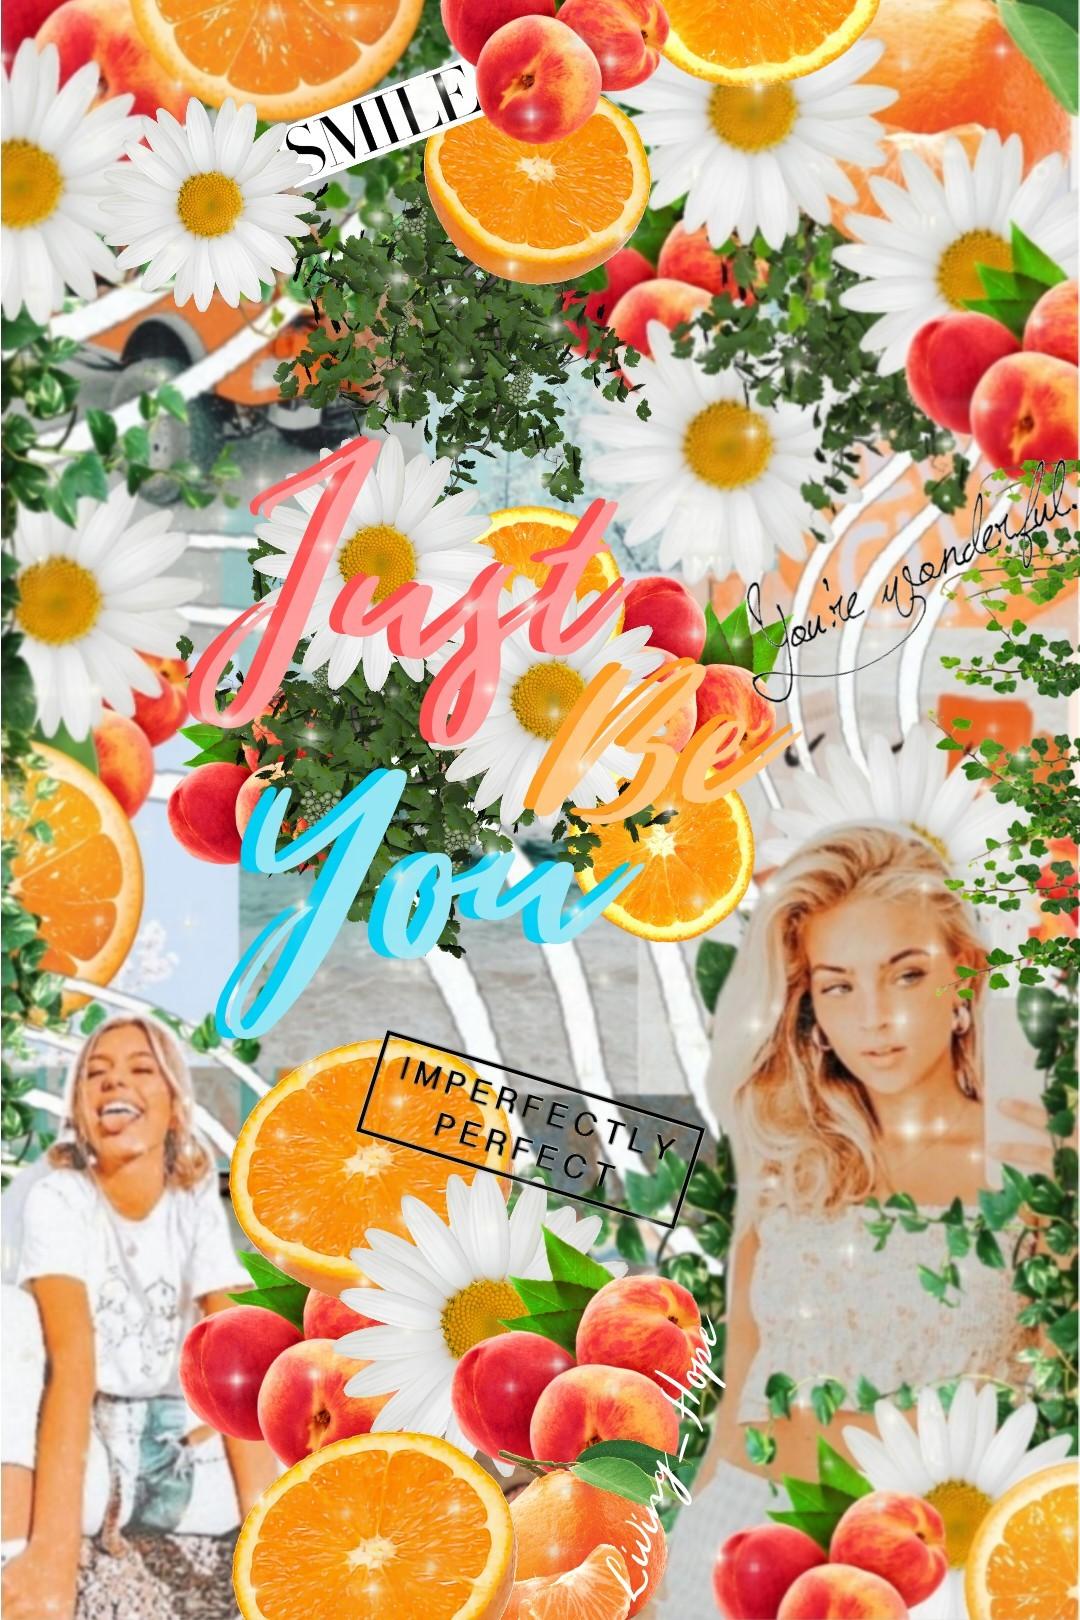 🍊 3~18~21 🍊 (tap) 
I'm trying new styles here 🙋‍♀️ So tell me what you think please! 🤔 This collage took me soooo long to make! 😂 Qotd: How many languages do you speak? I speak 3 languages English, Sign Language and French